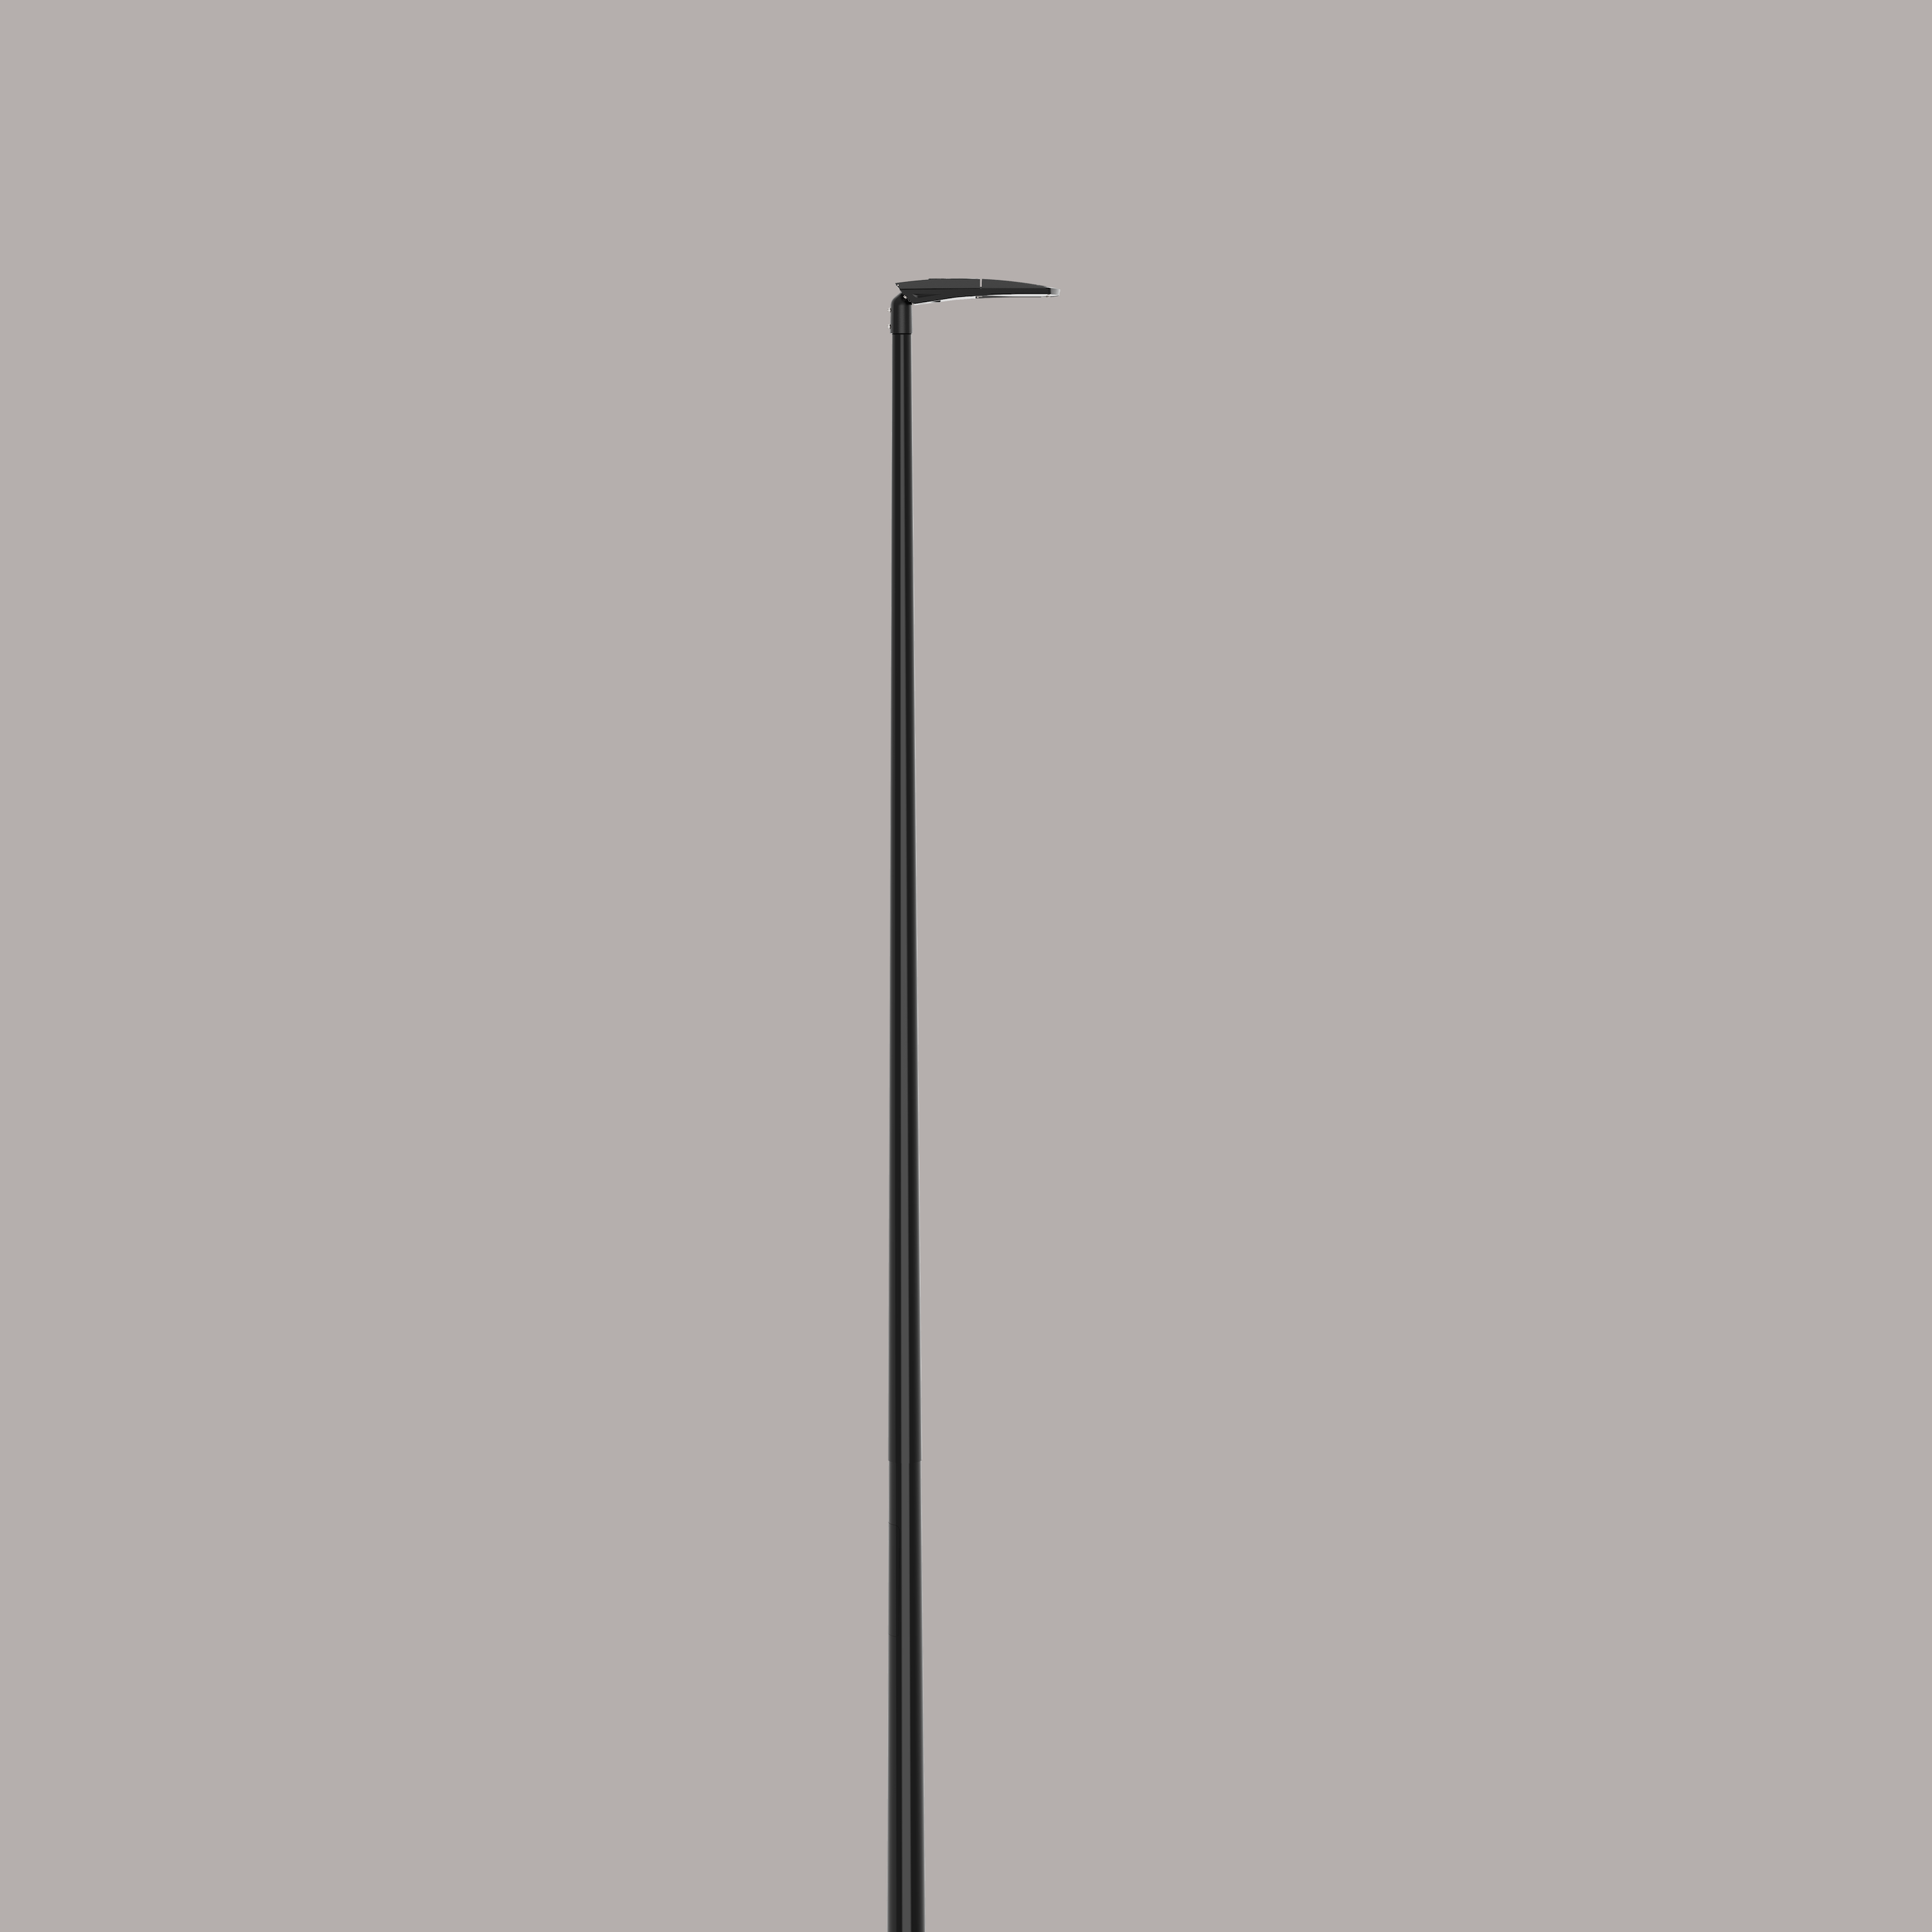 The Oxford clean lines and subtle profile result in an elegant, modern luminaire suitable for a wide range of urban and infrastructure environments.